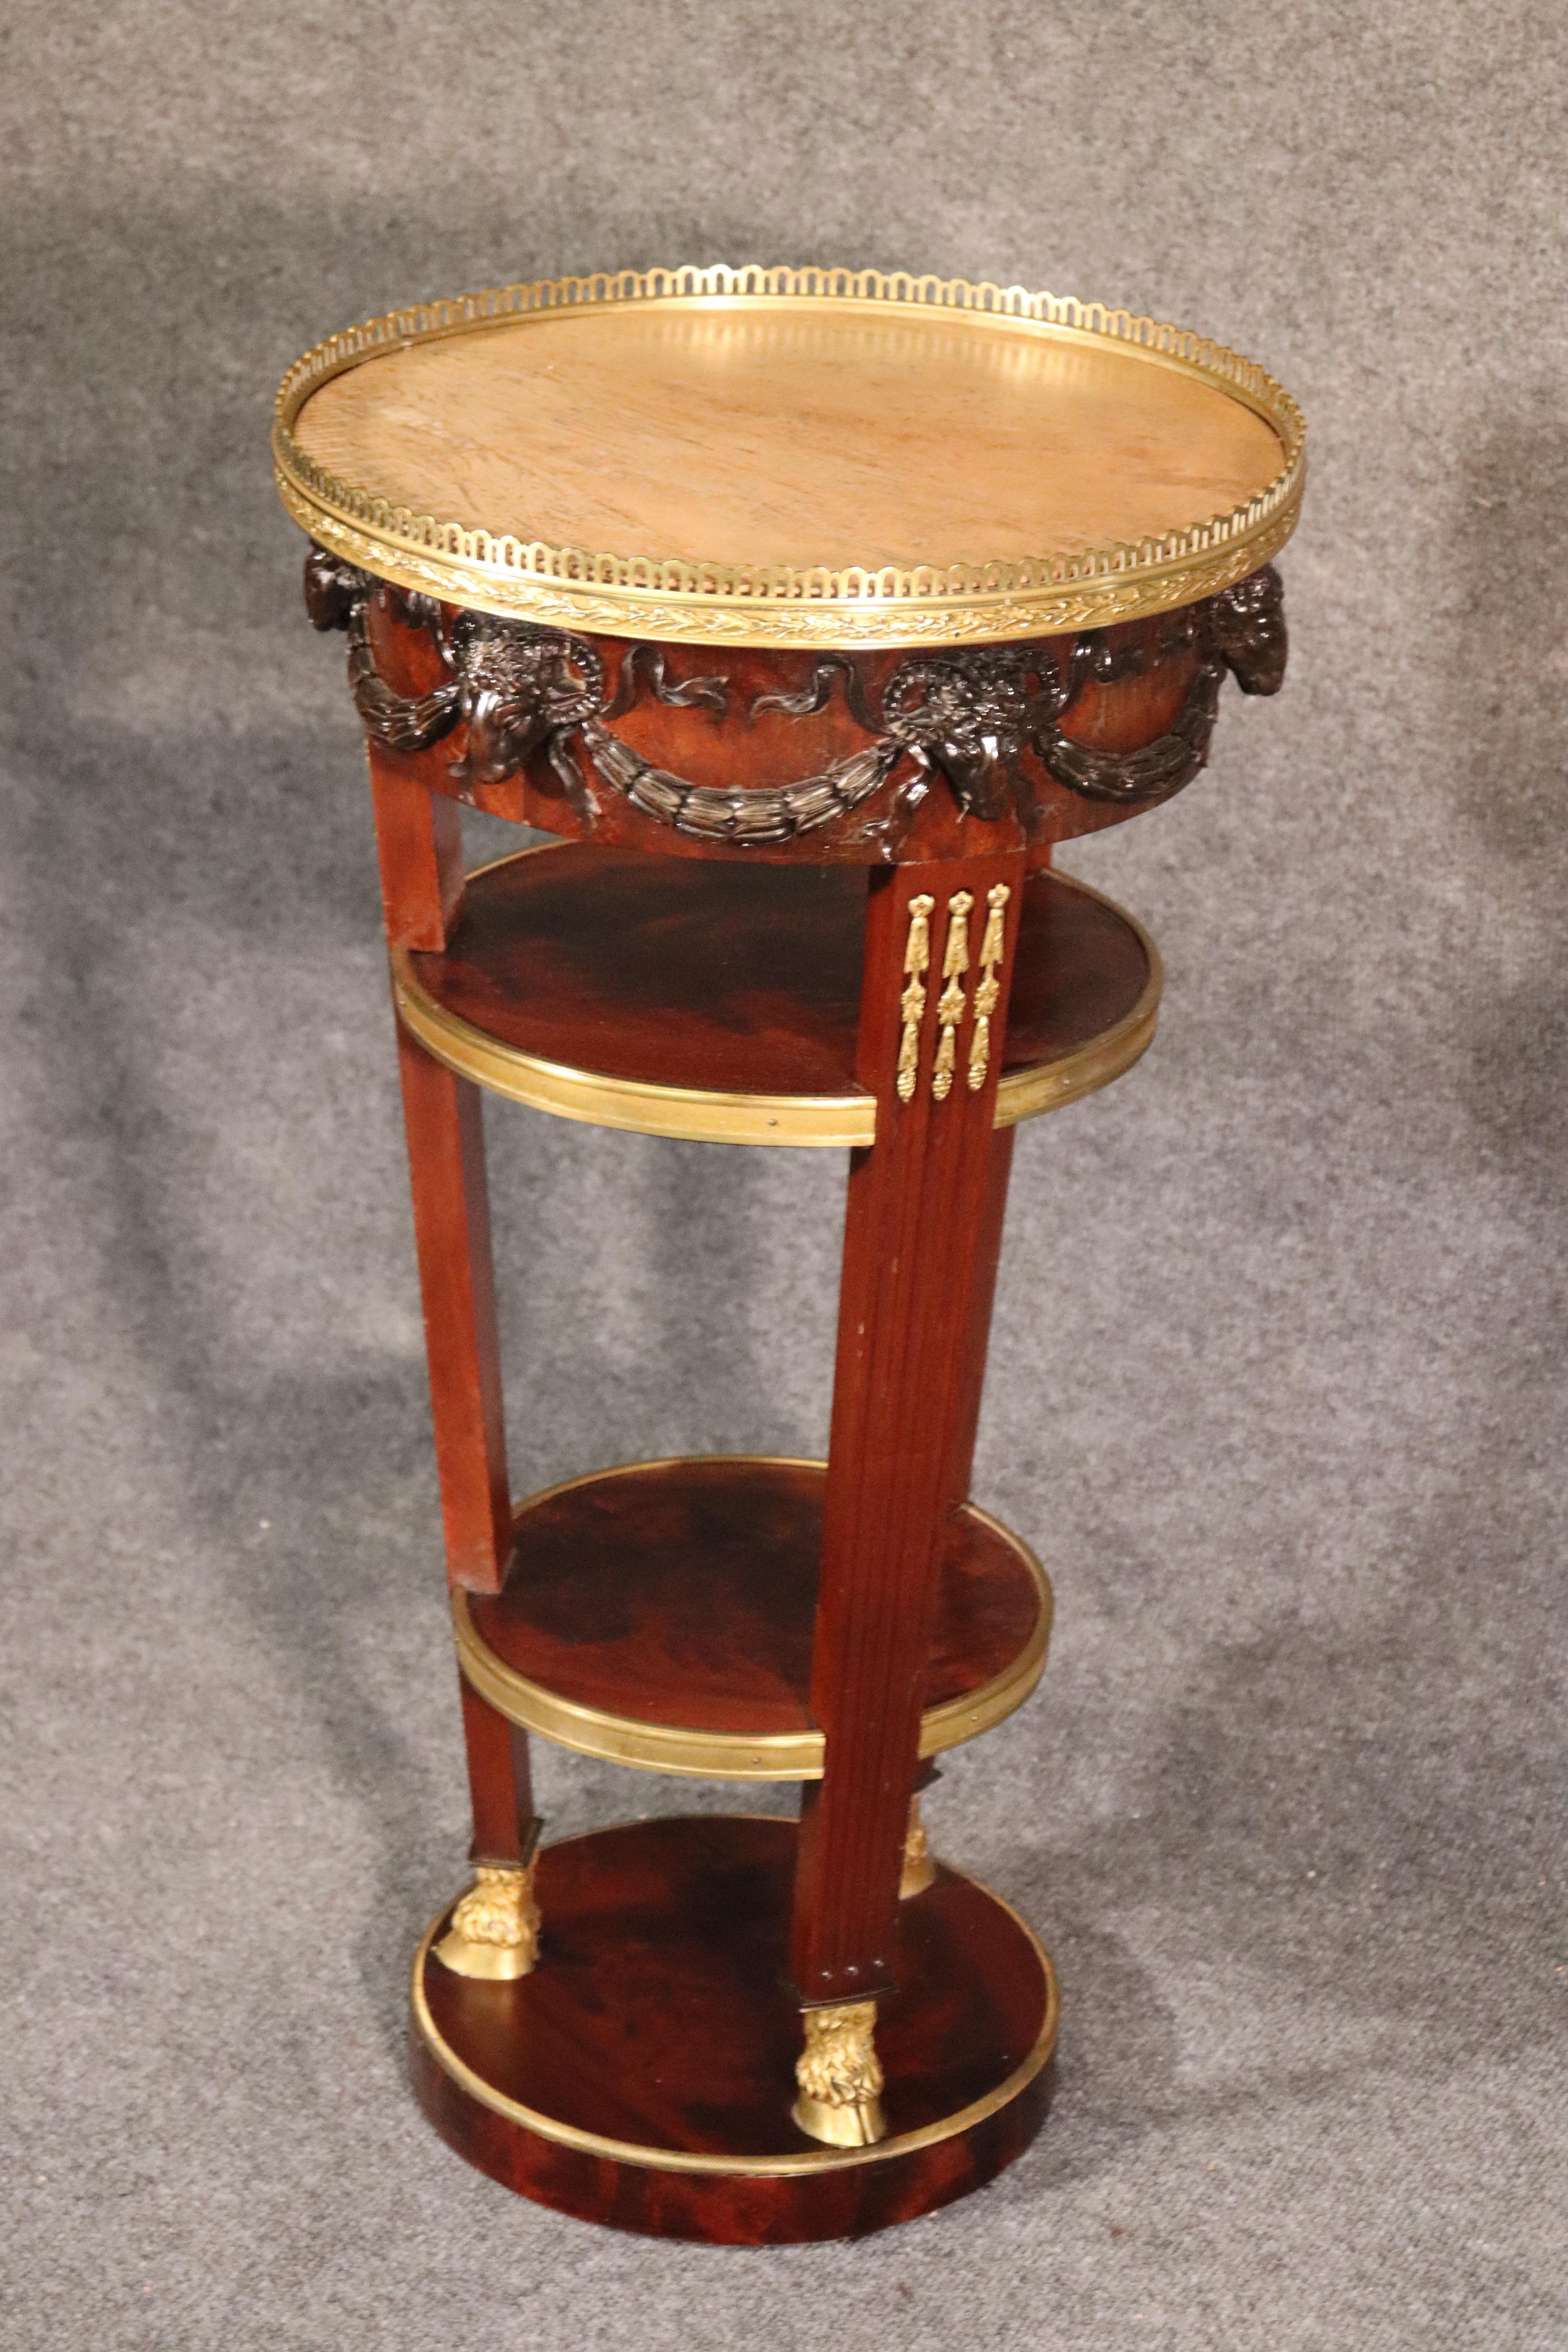 This is a stunning end table made of solid walnut and featuring a gorgeous slab of round marble on top with a complimenting brass gallery and carved ram’s heads on the terminals at the top. The stand has been French-polished and is in superb